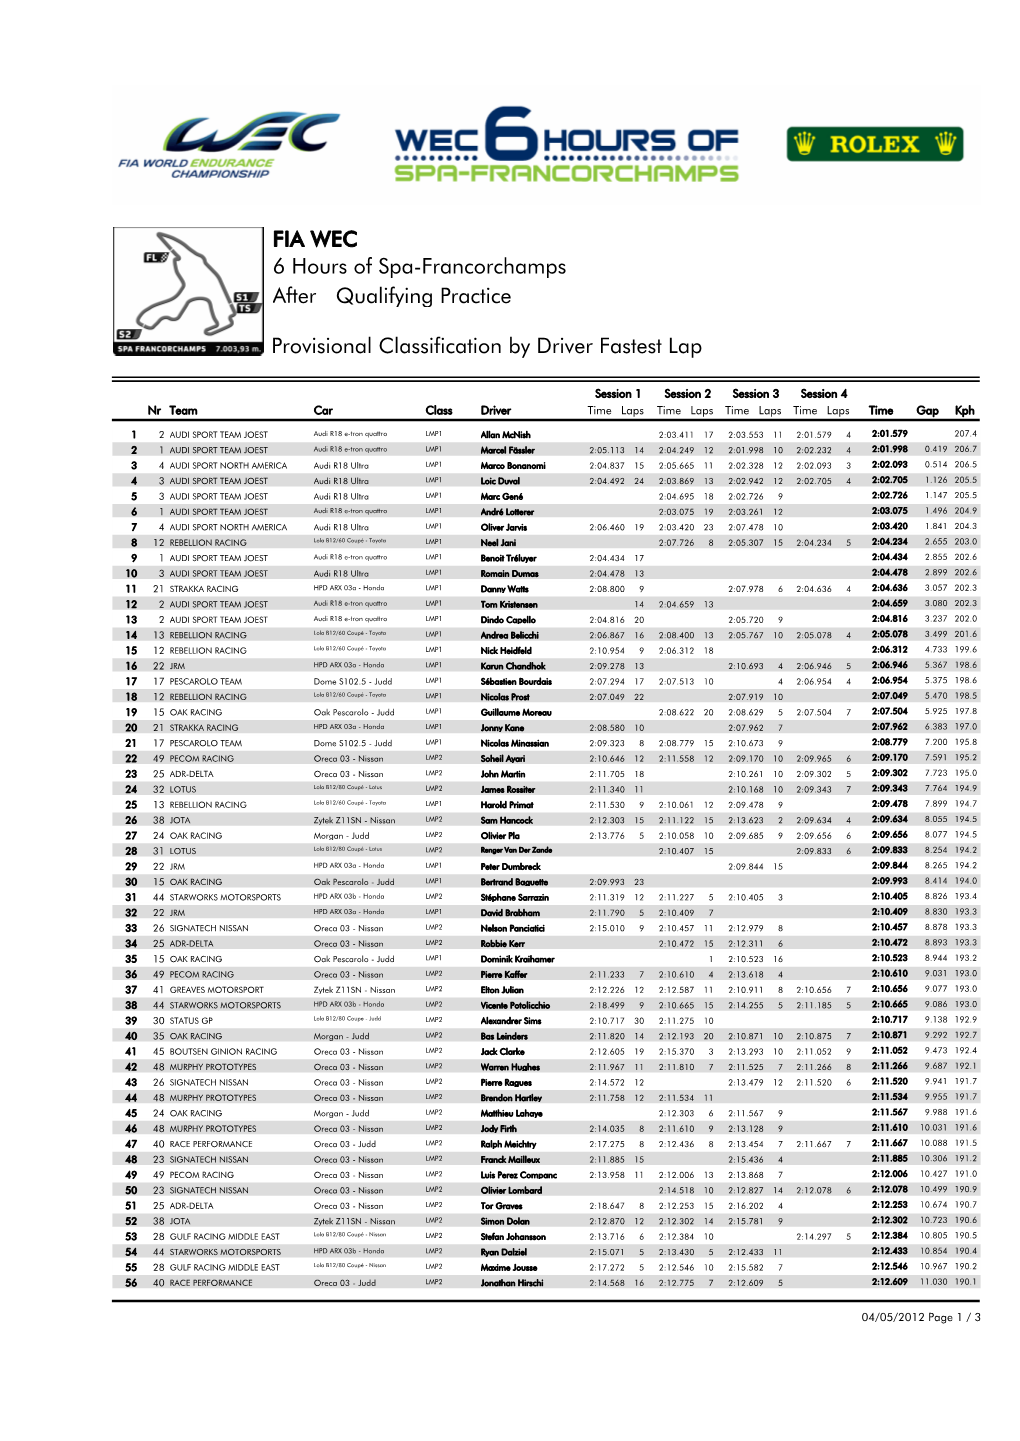 Qualifying Practice 6 Hours of Spa-Francorchamps FIA WEC After